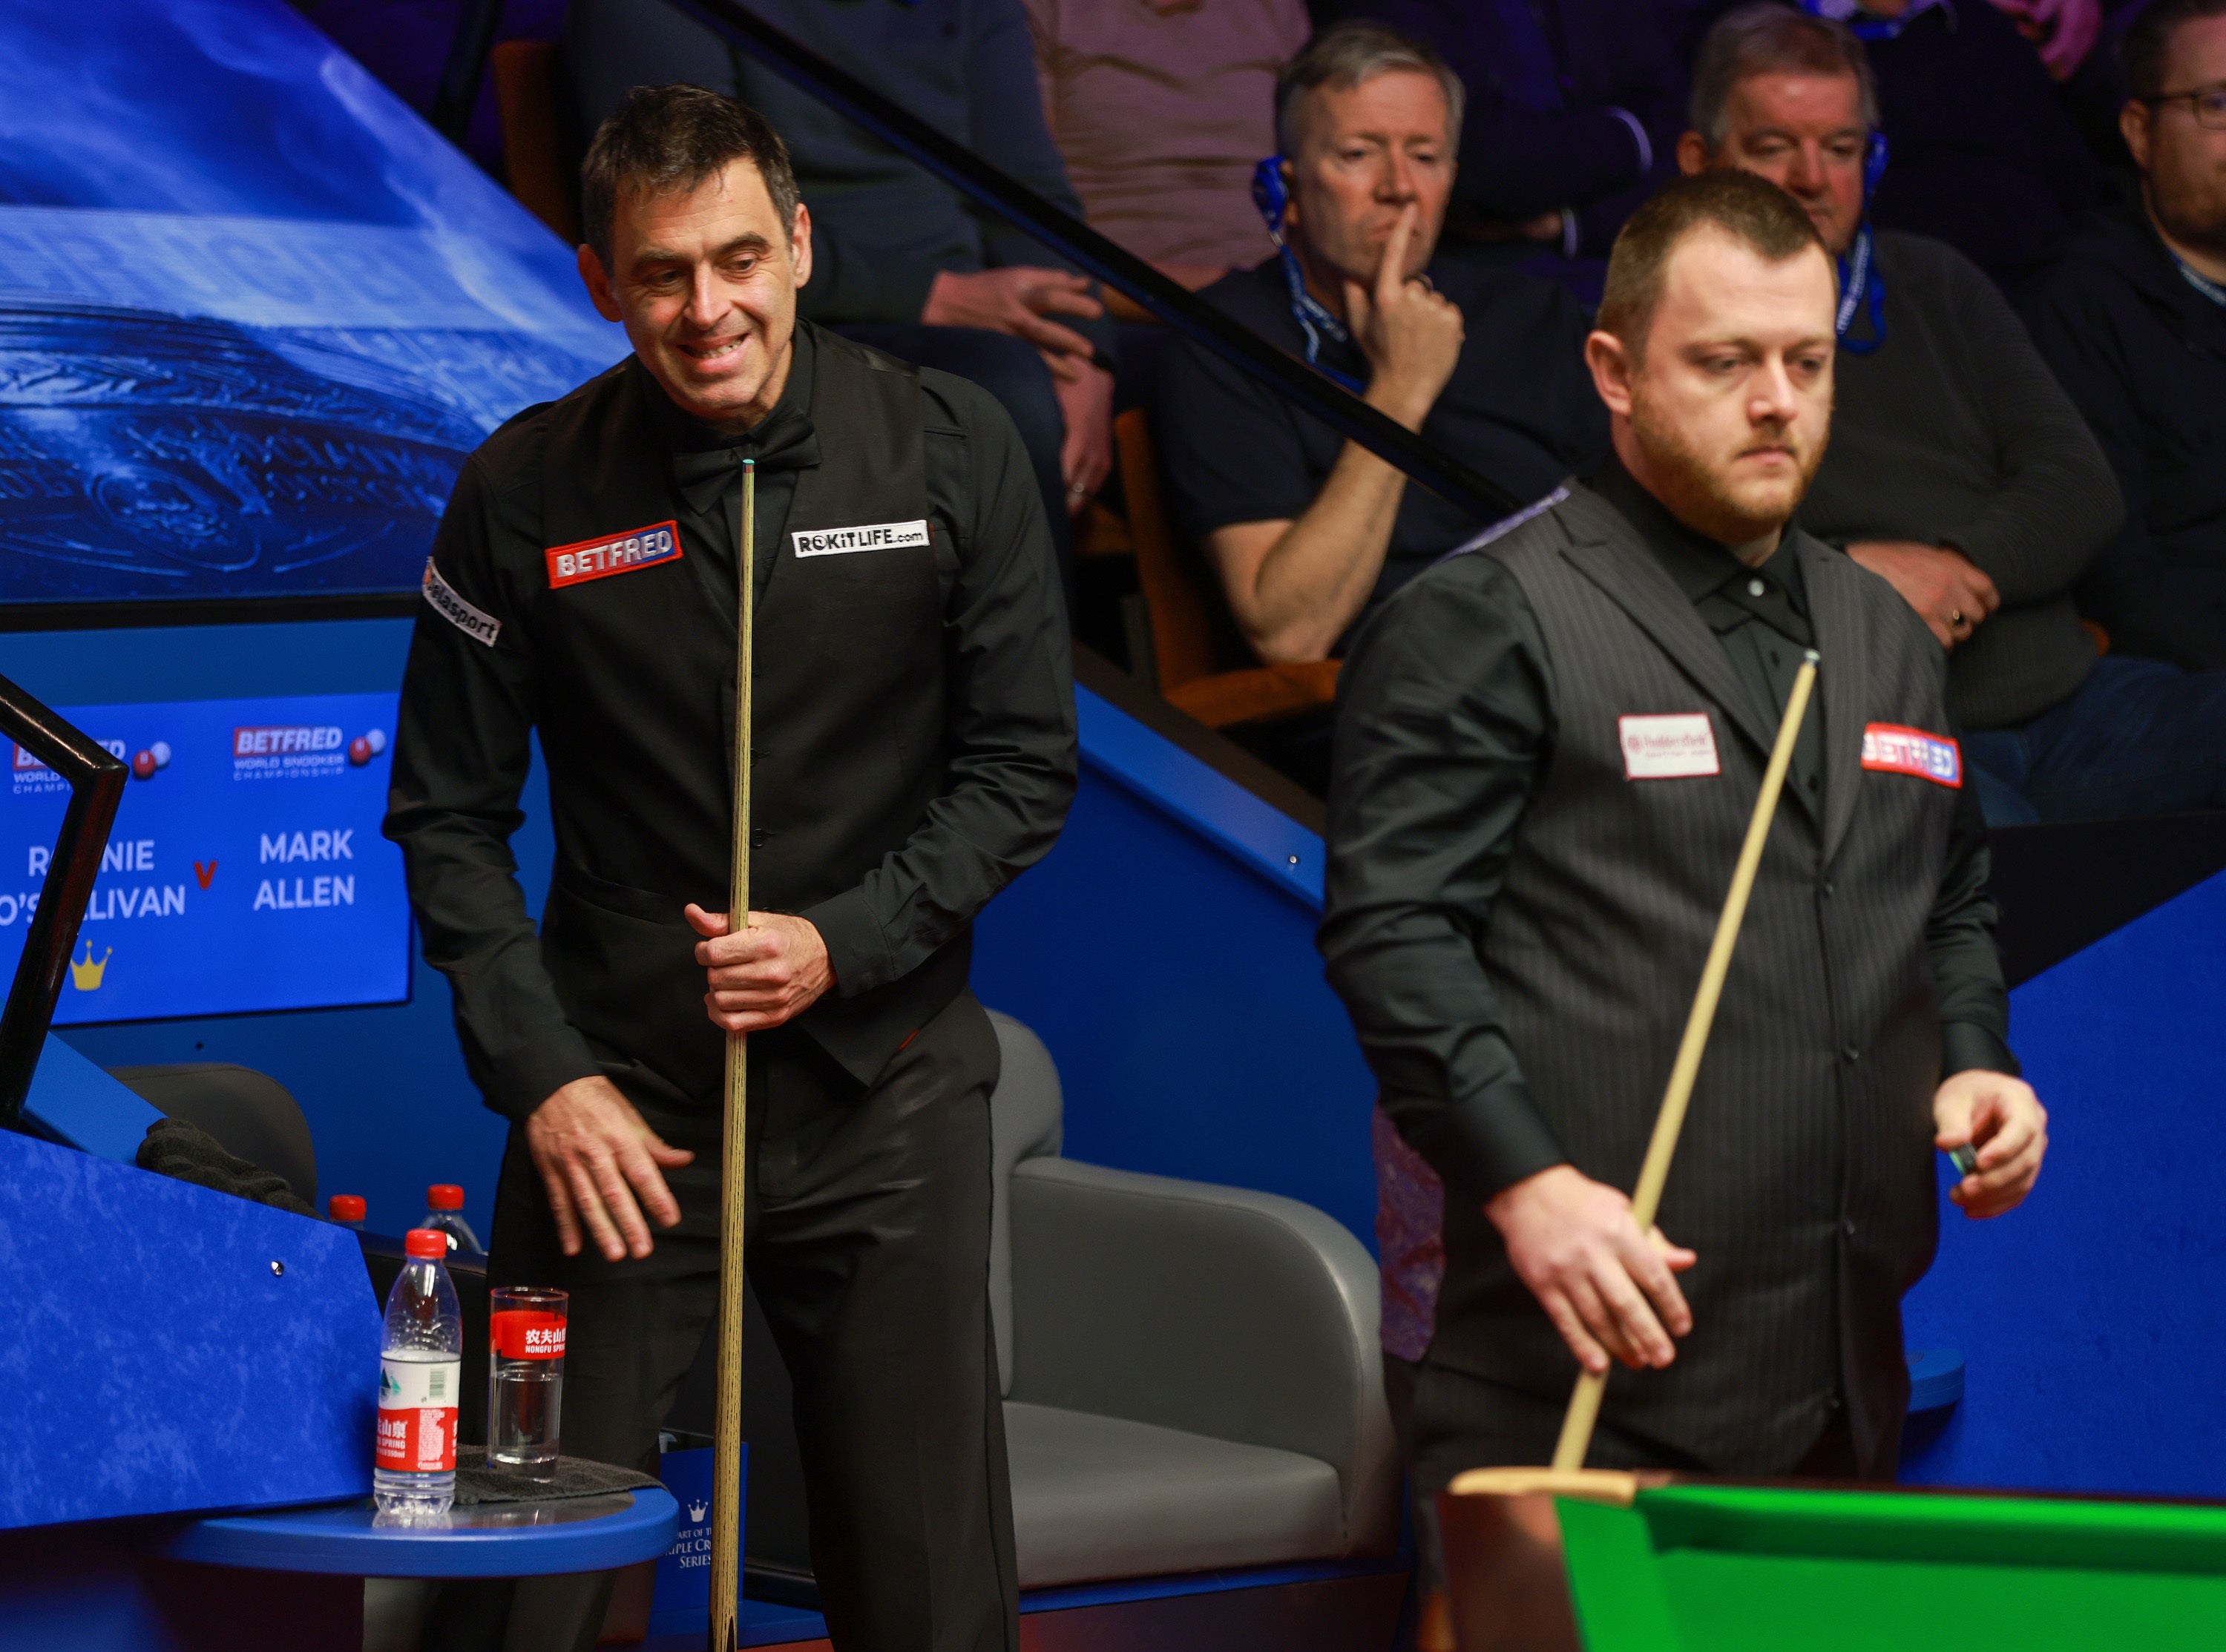 Ronnie O’Sullivan got the better of Mark Allen in their opening session (Ian Hodgson/PA)